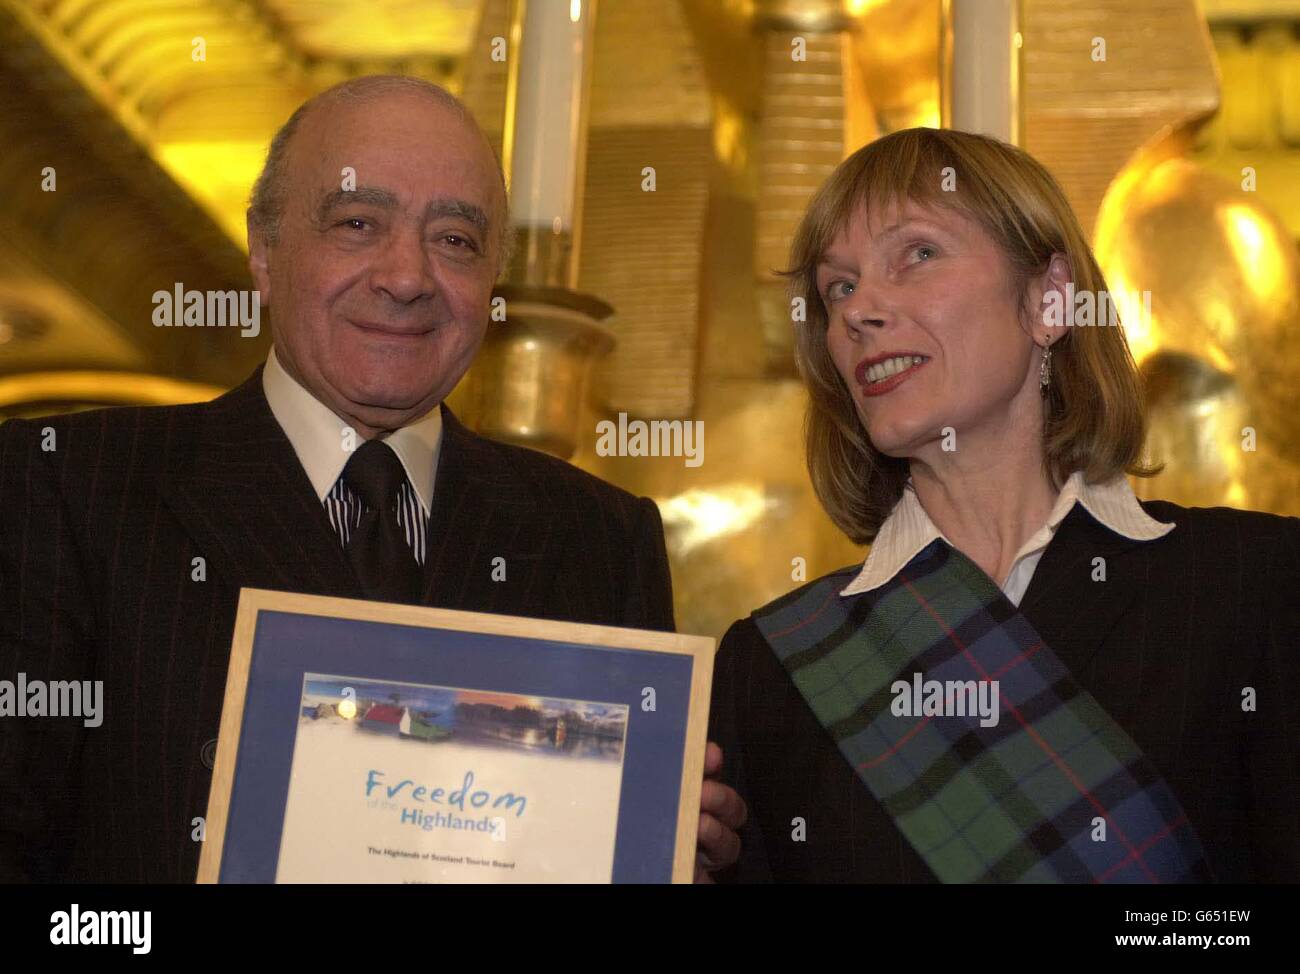 harrods-chairman-mohamed-al-fayed-accepts-a-freedom-of-the-highlands-G651EW.jpg